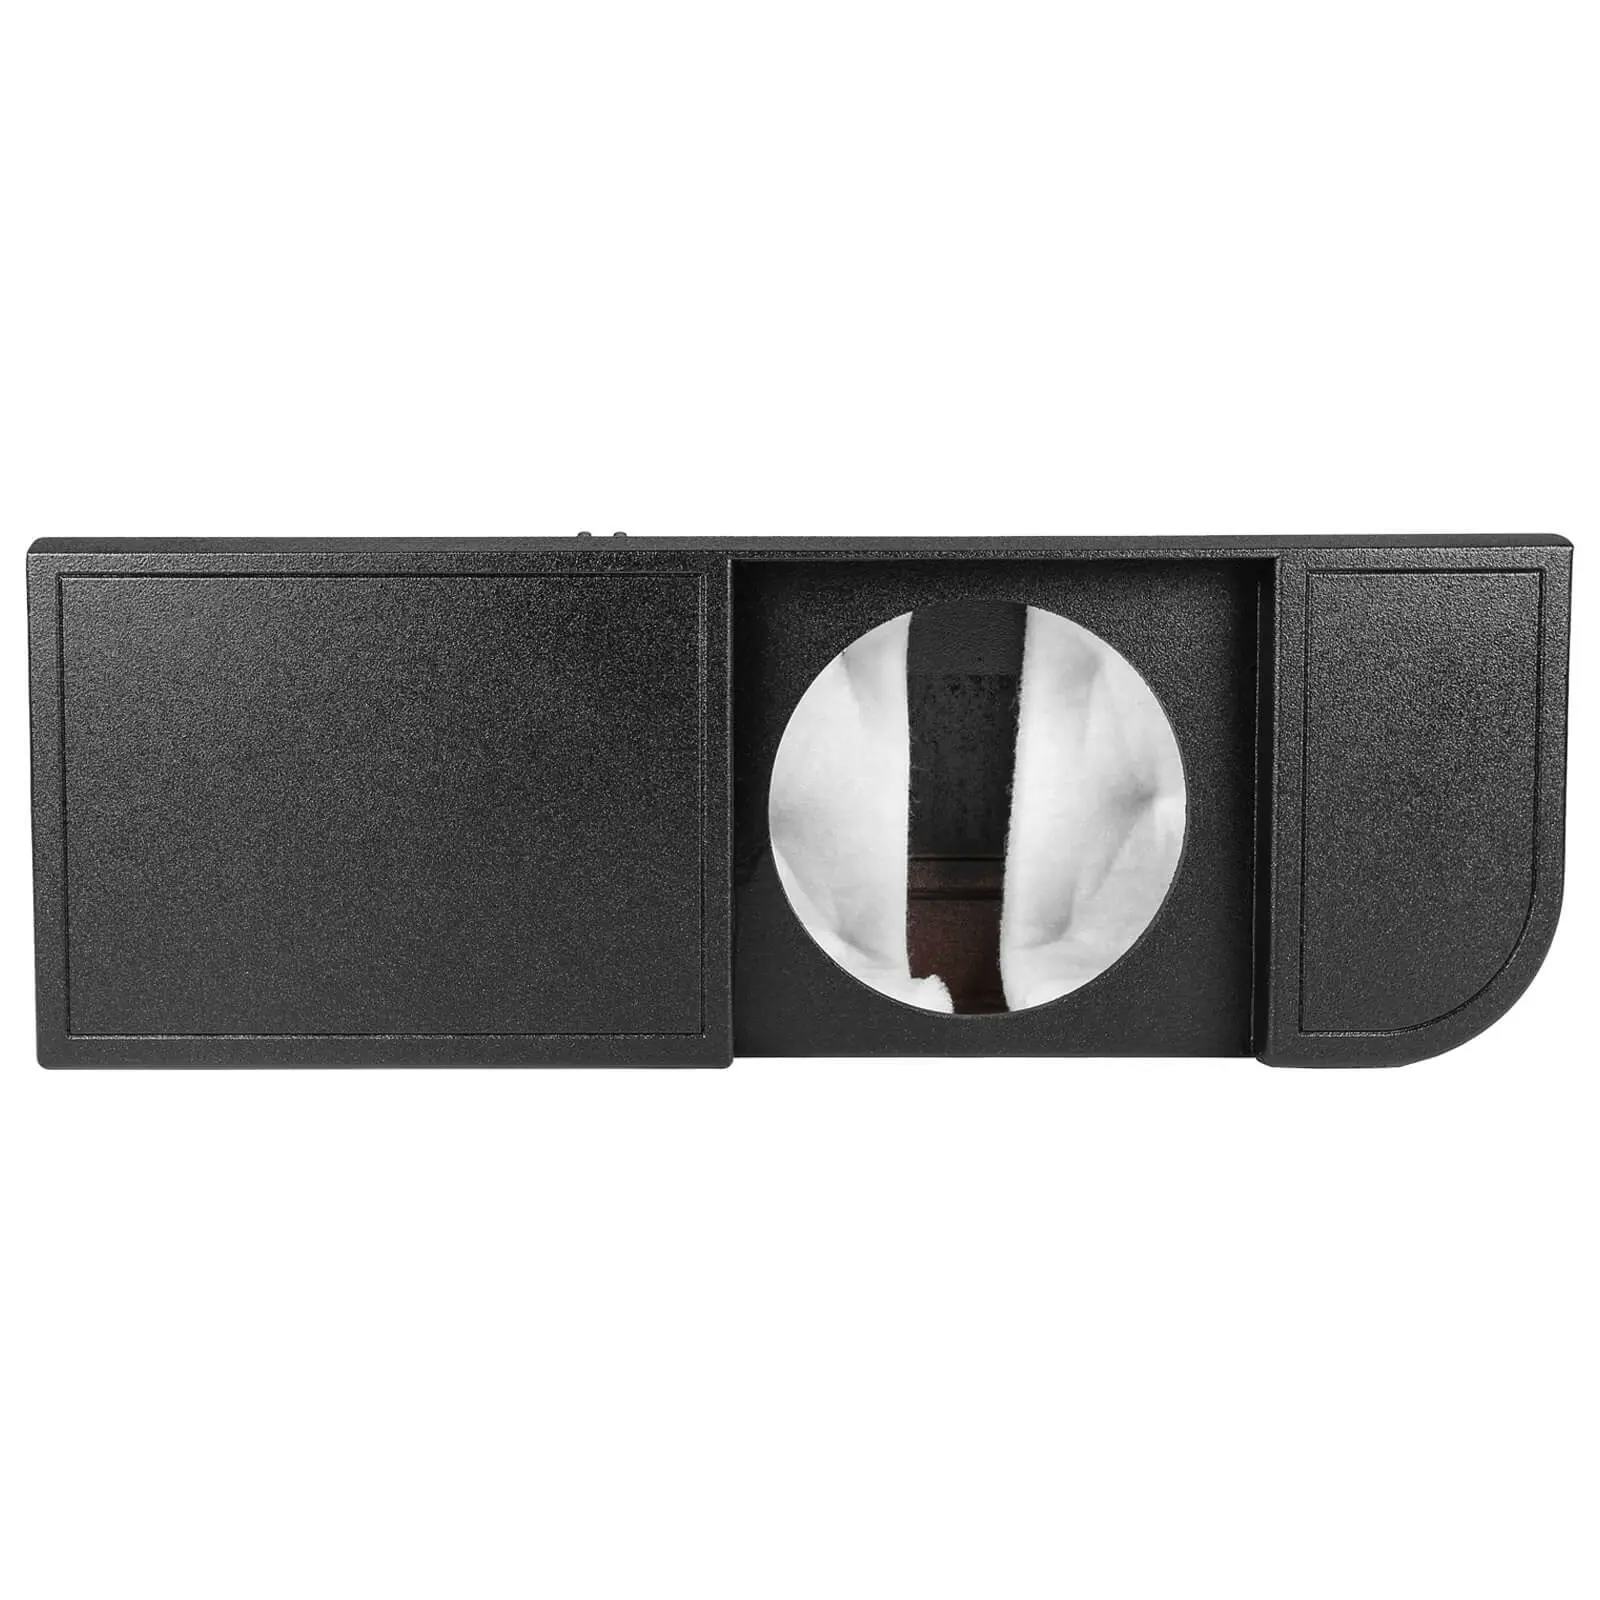 2015-2023 Ford F-150 Super Crew Cab Compatible Single 12" Ported Armor Coated Subwoofer Enclosure #2